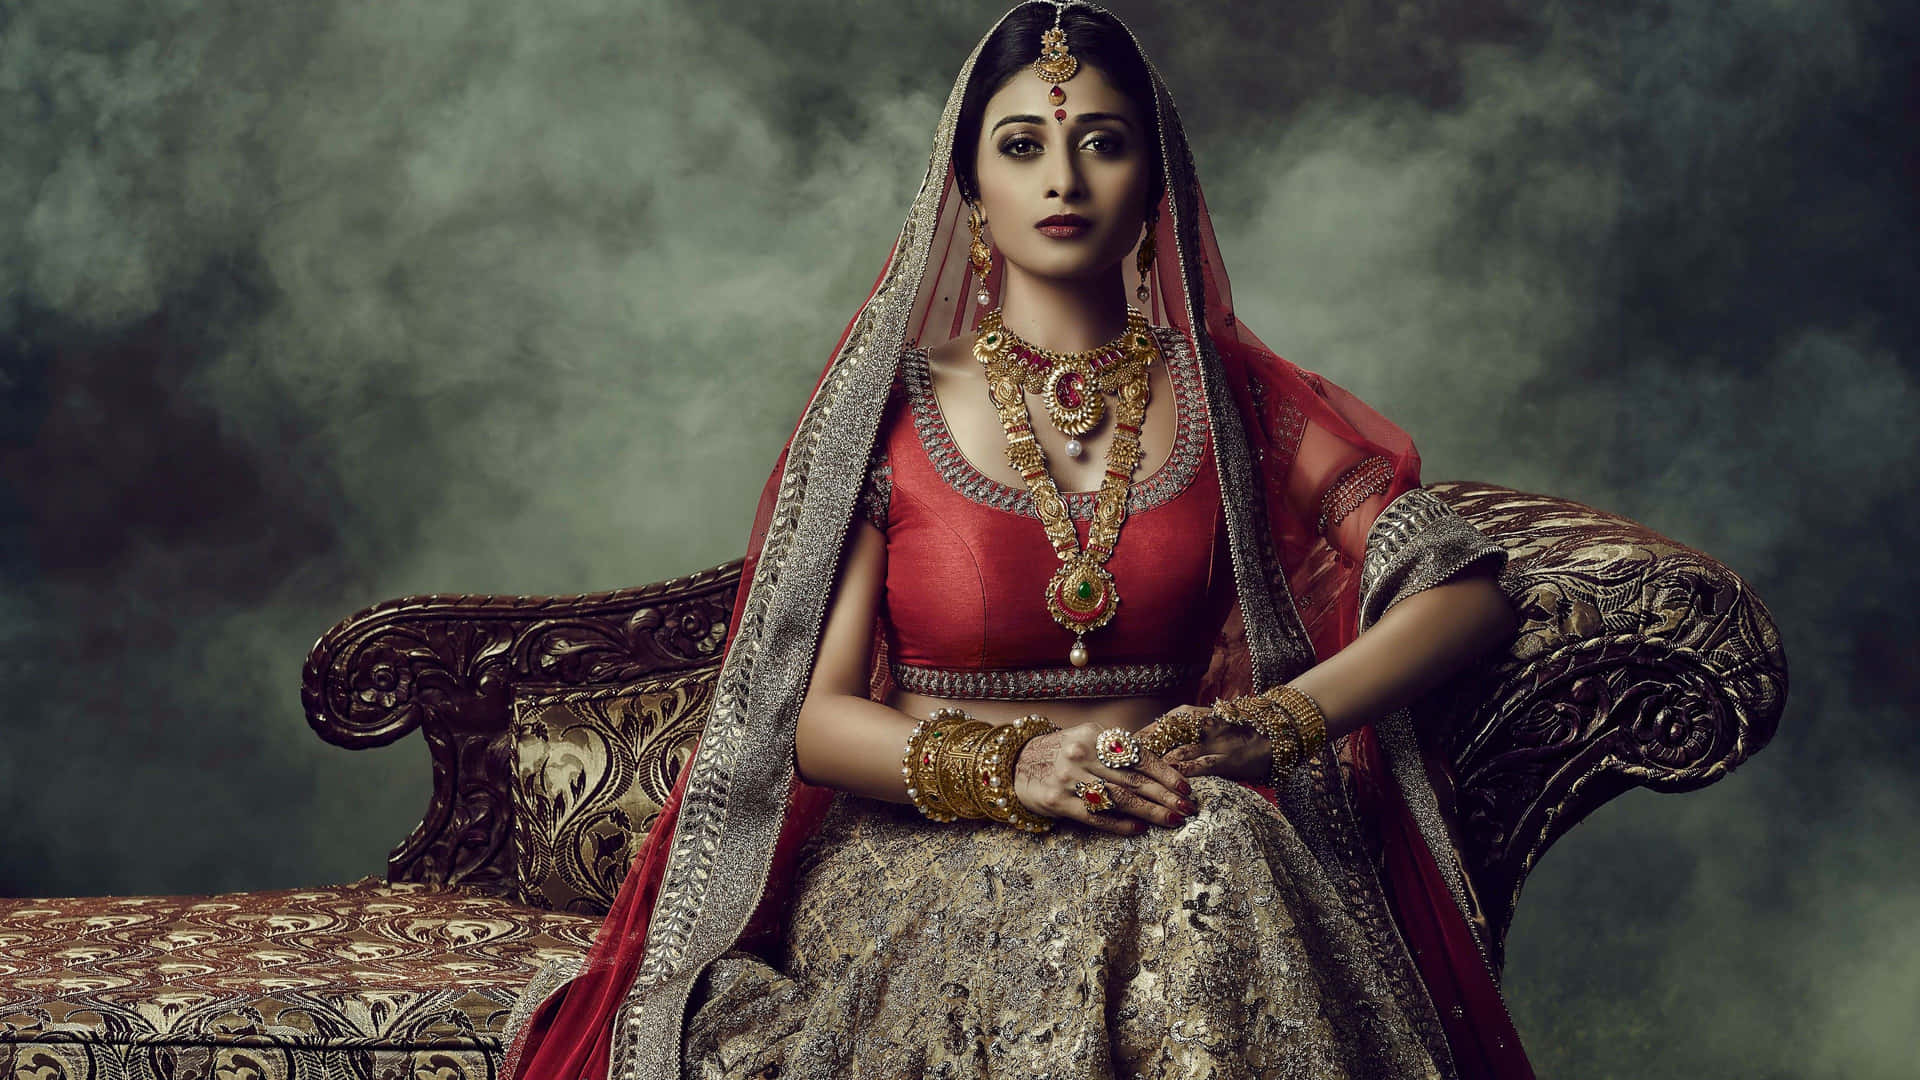 Traditional Indian Bride in Her Wedding Attire